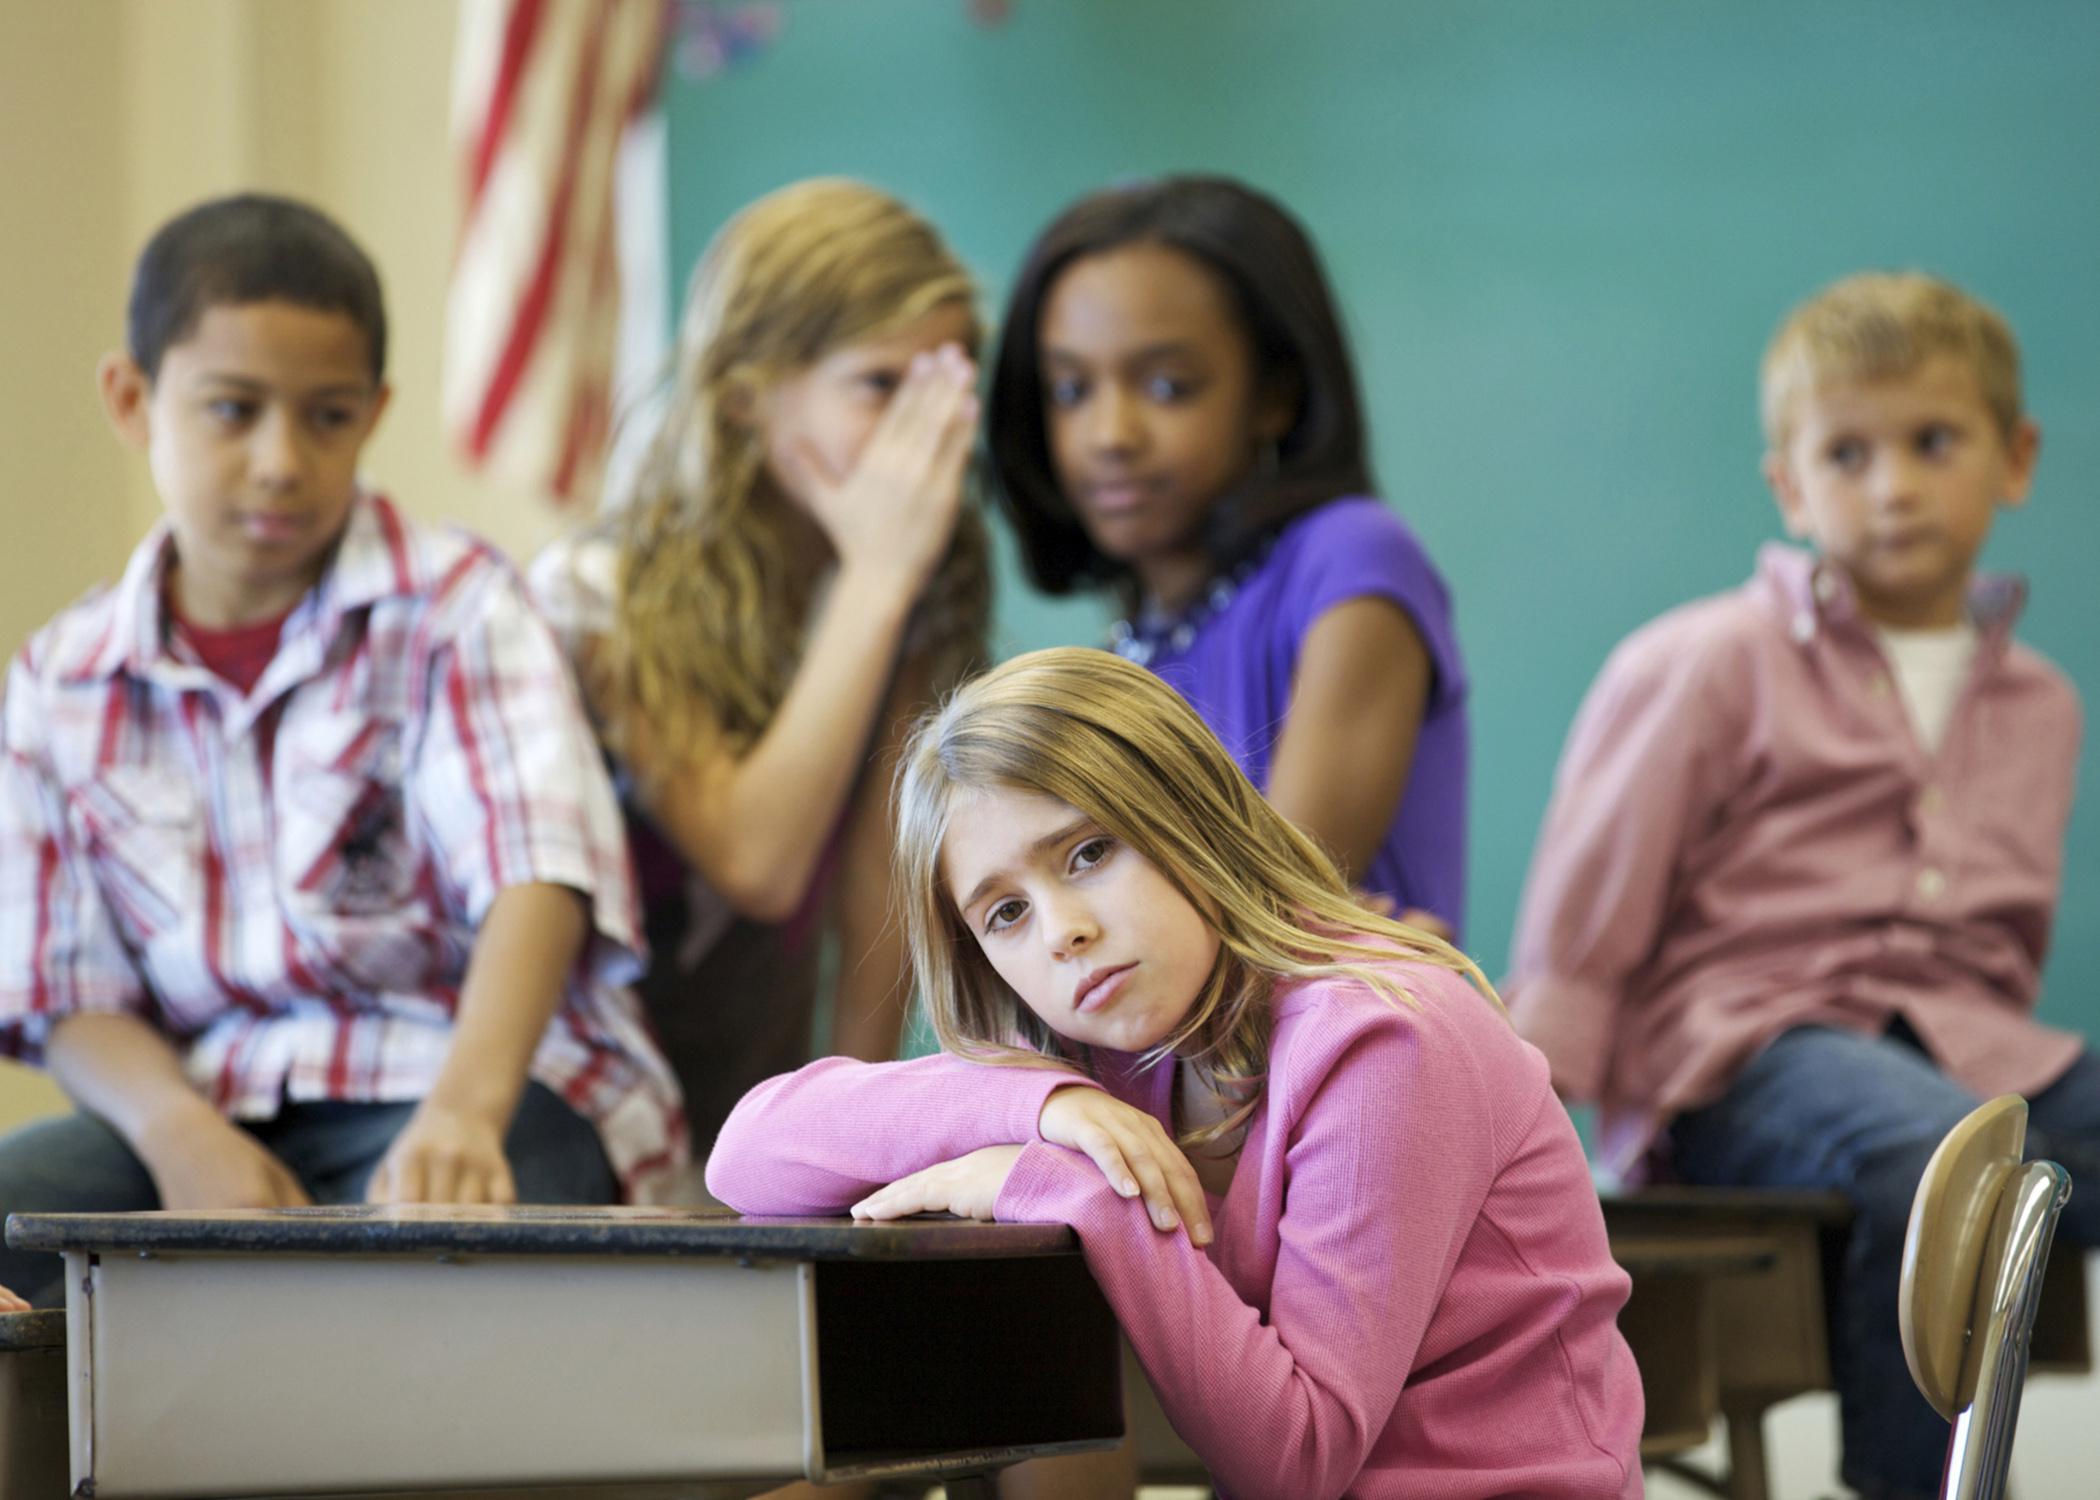 As school starts back, parents and other adults should be on the lookout for signs that a child could be involved in bullying. Bullying can cause lasting effects for bullies, victims of bullies and bystanders. (Photo by Thinkstock/iStockphoto)